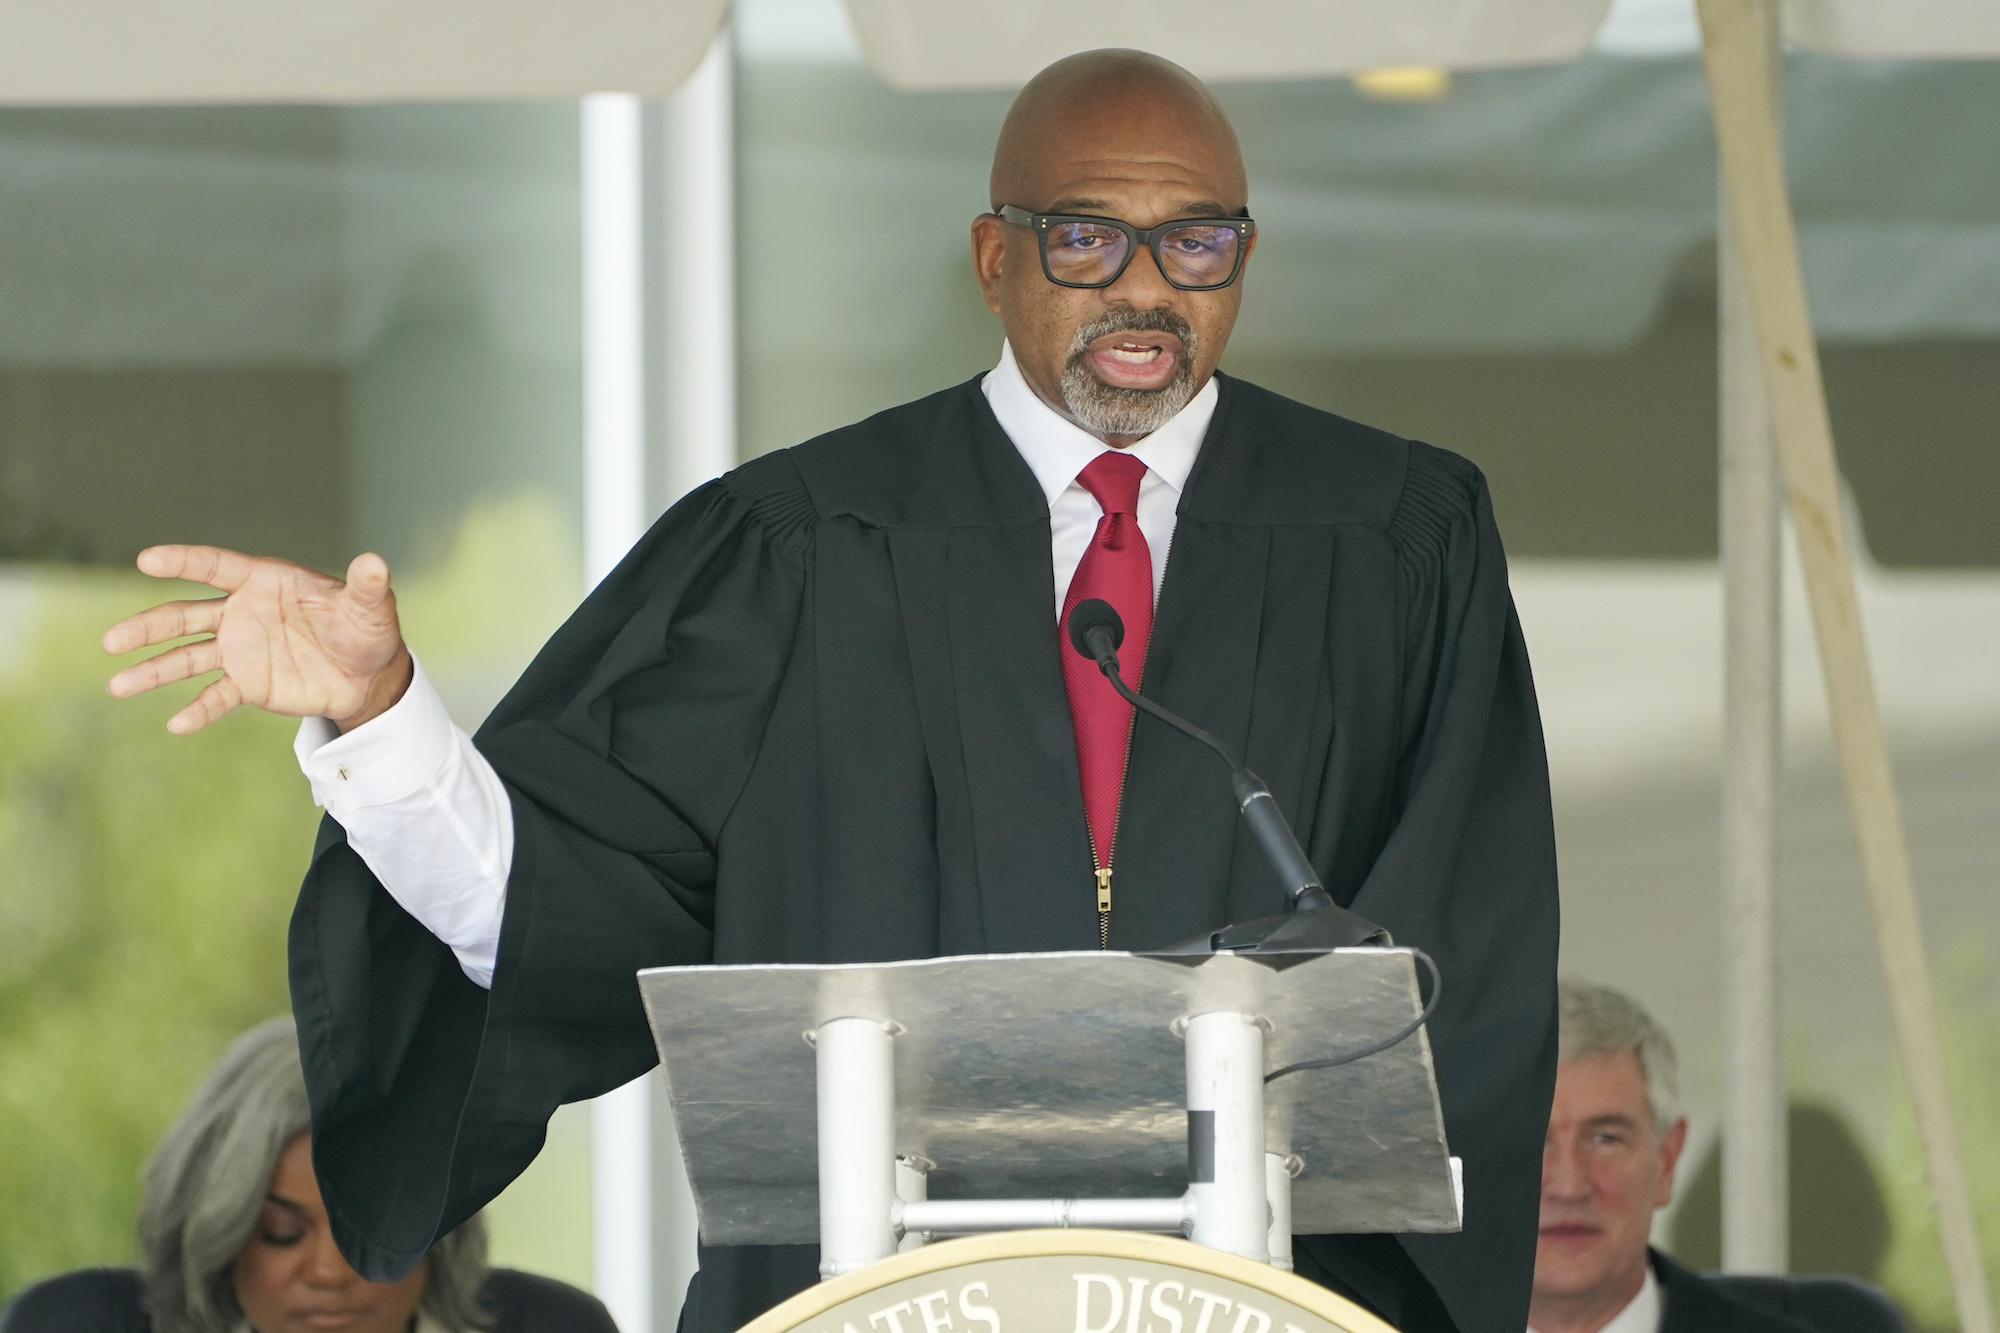 a photo of a Black man in a judge's dress wearing glasses and holding his hand up at a podium